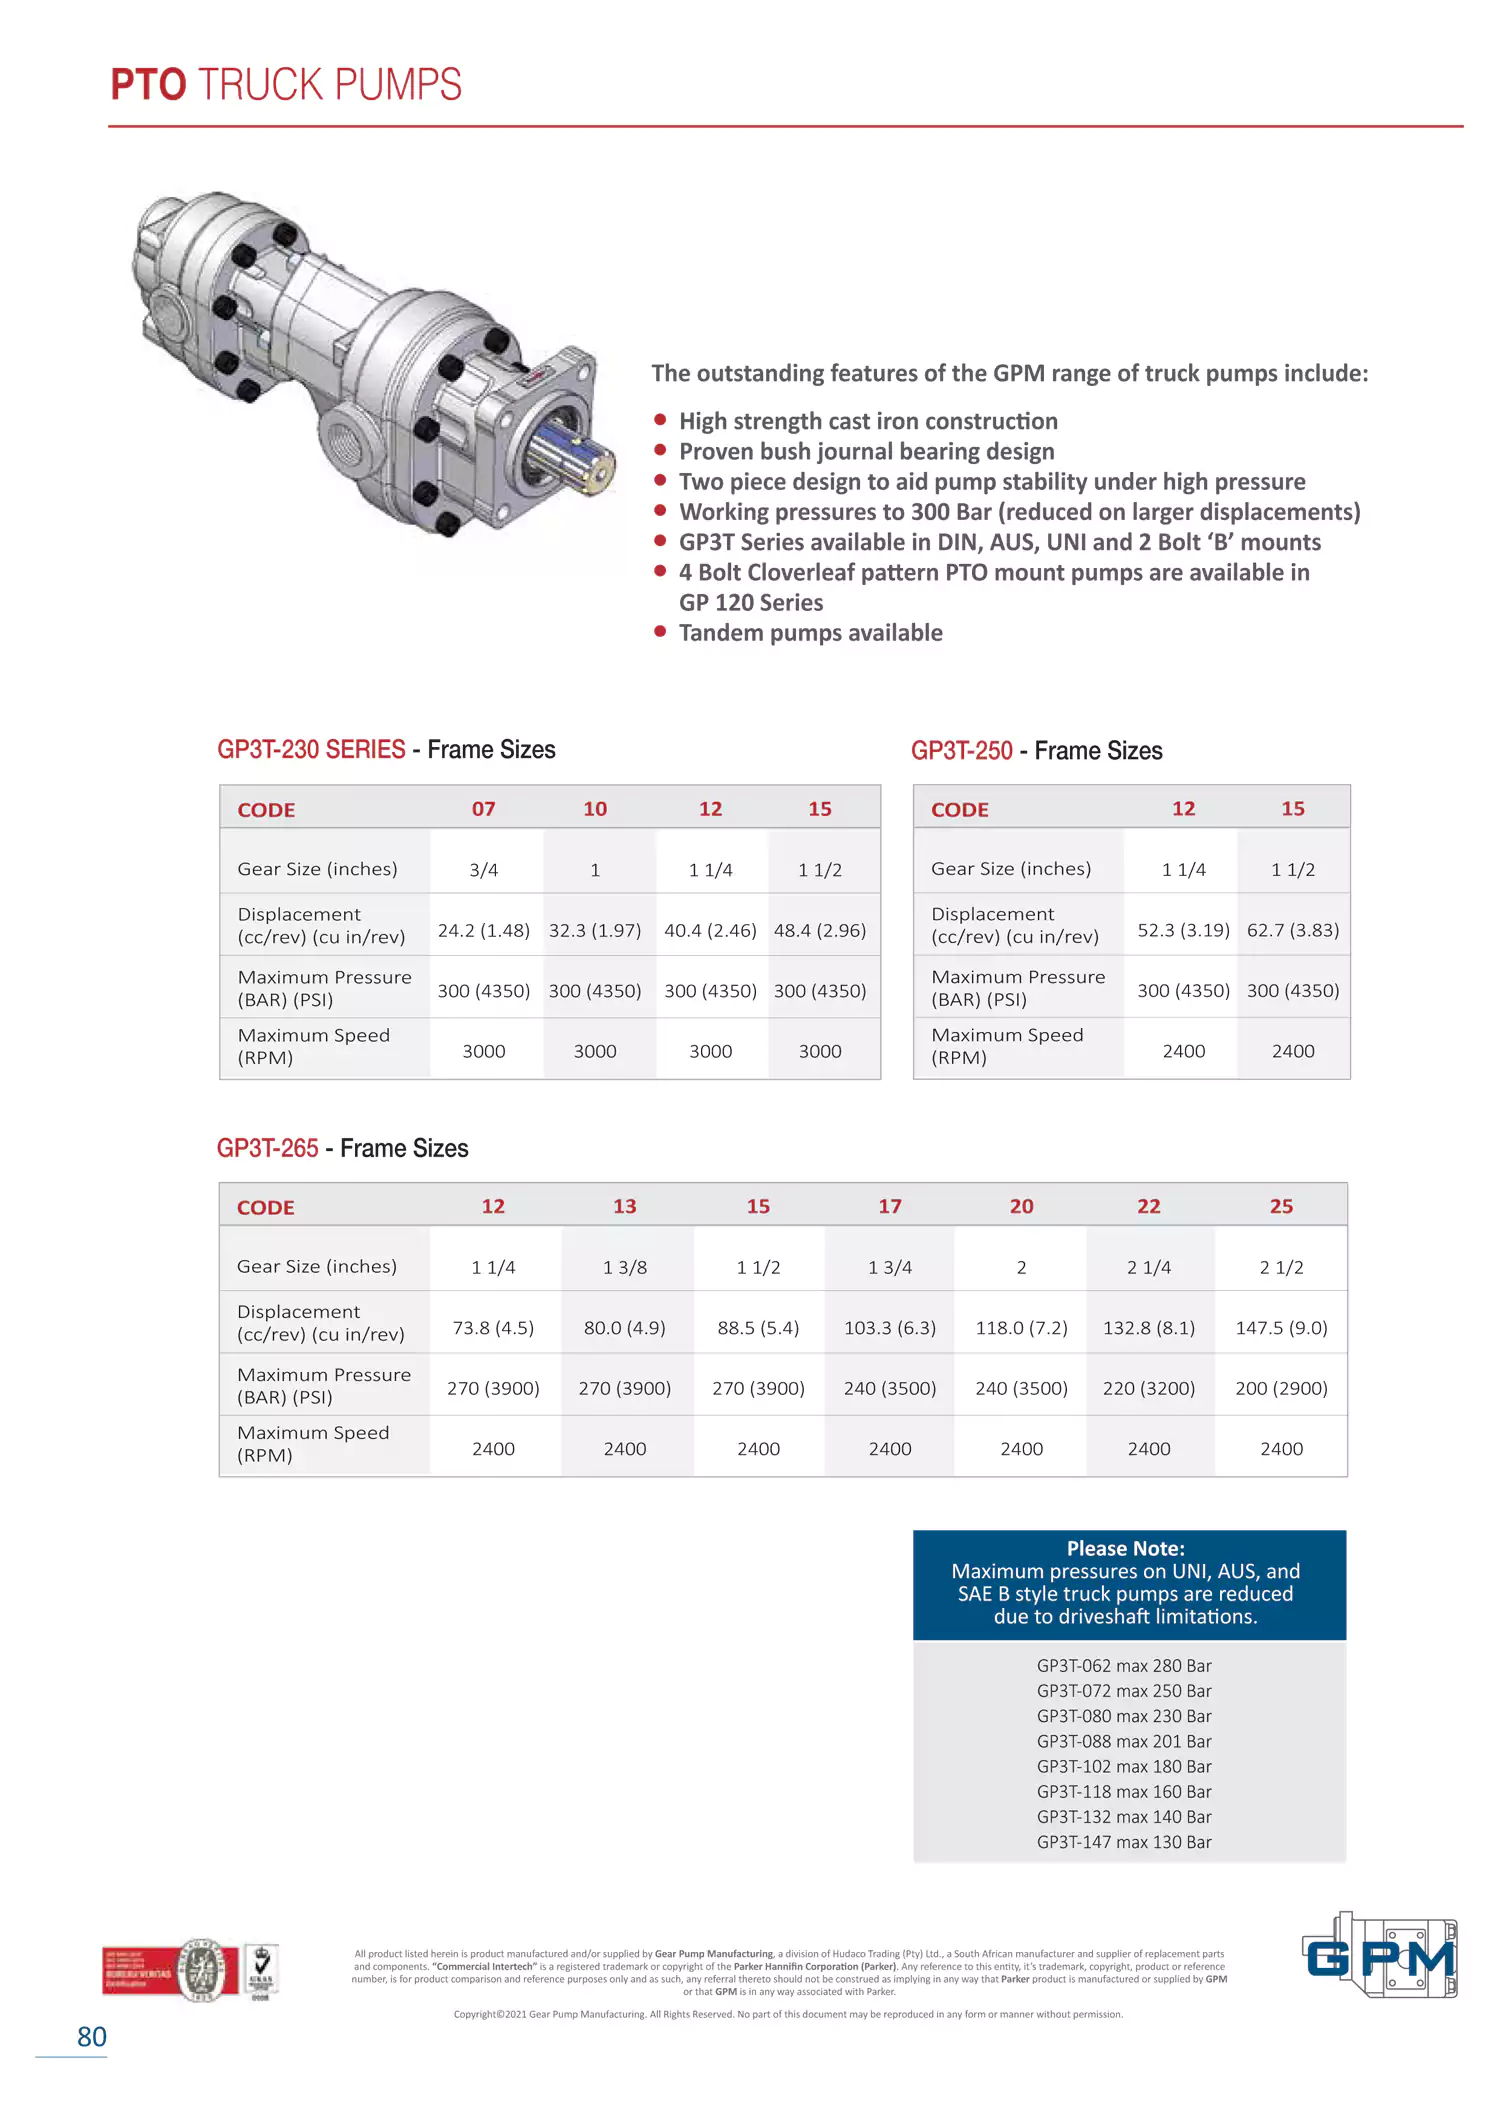 Page-80 - PTO Truck Pumps